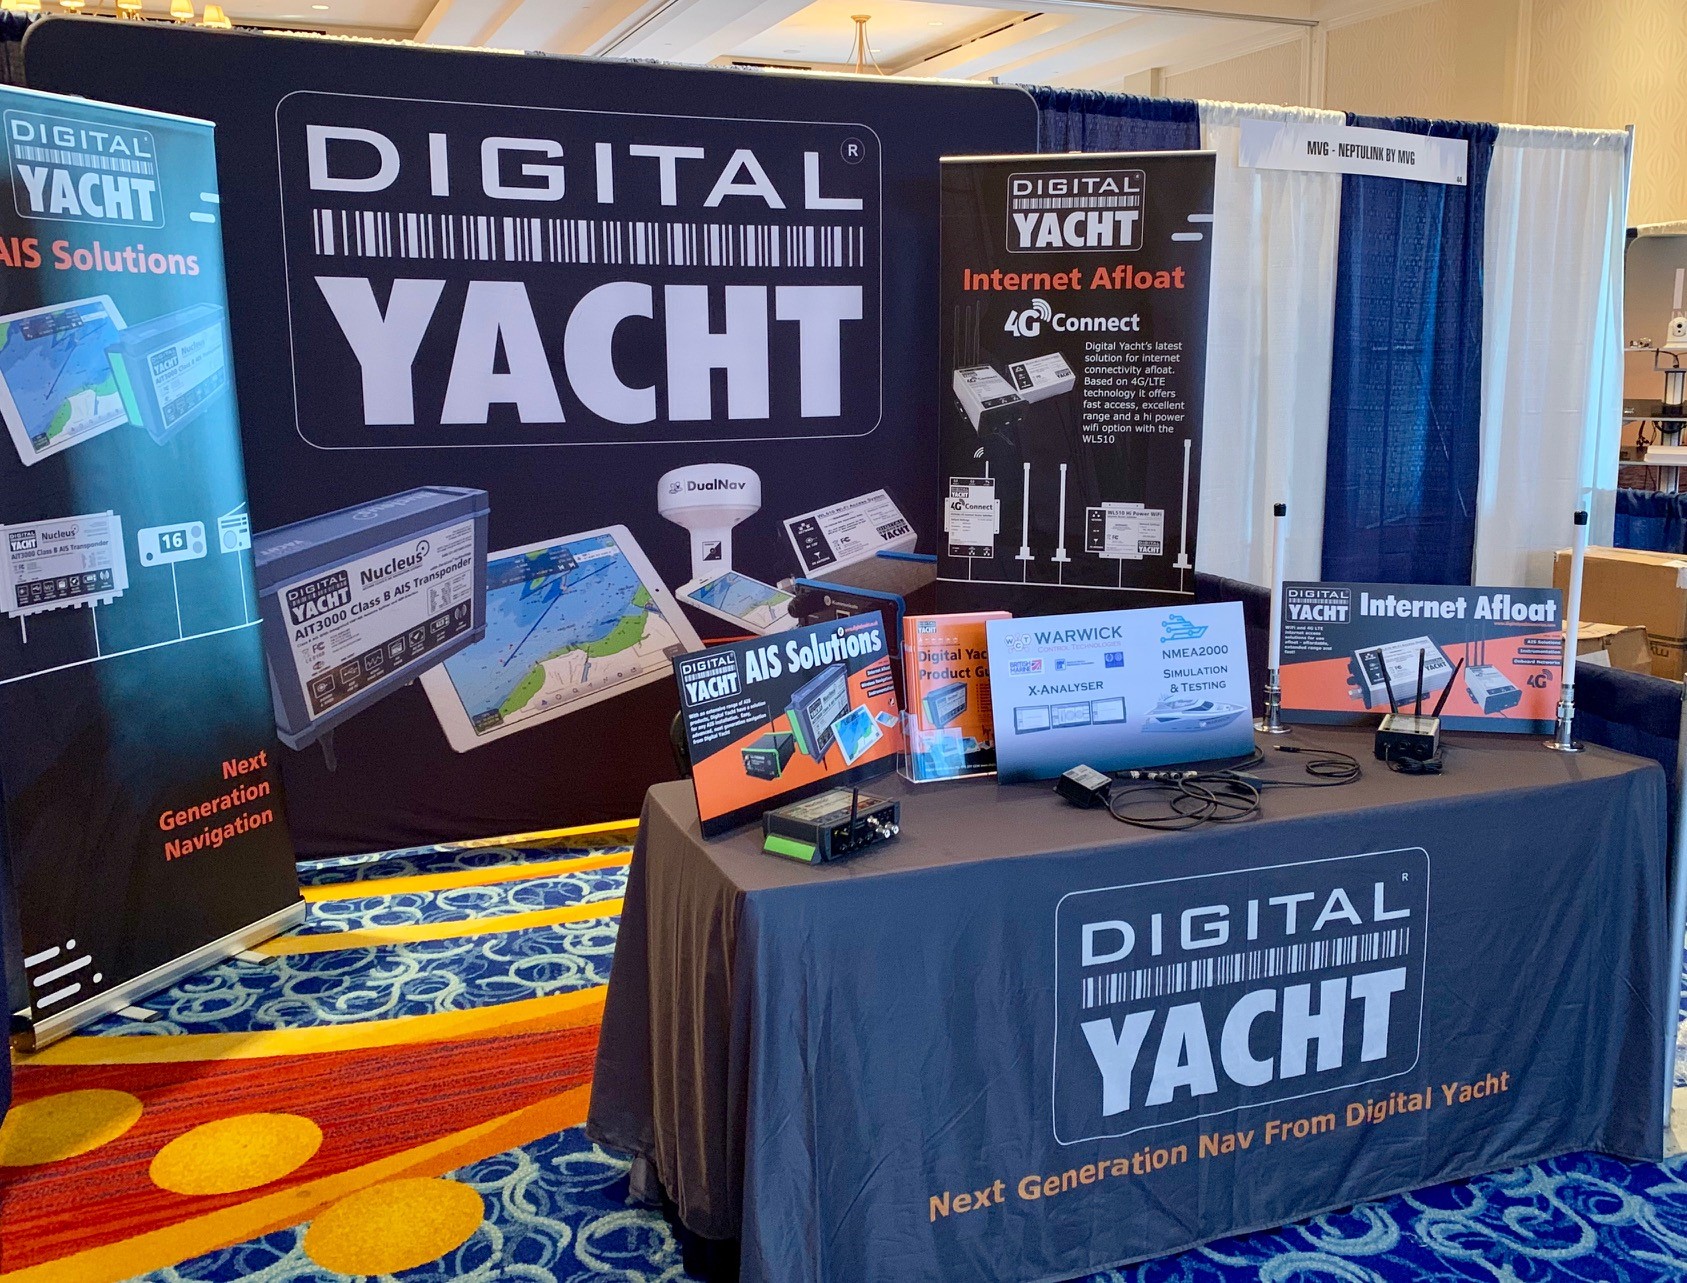 All set for the NMEA Conference 2019 Digital Yacht News